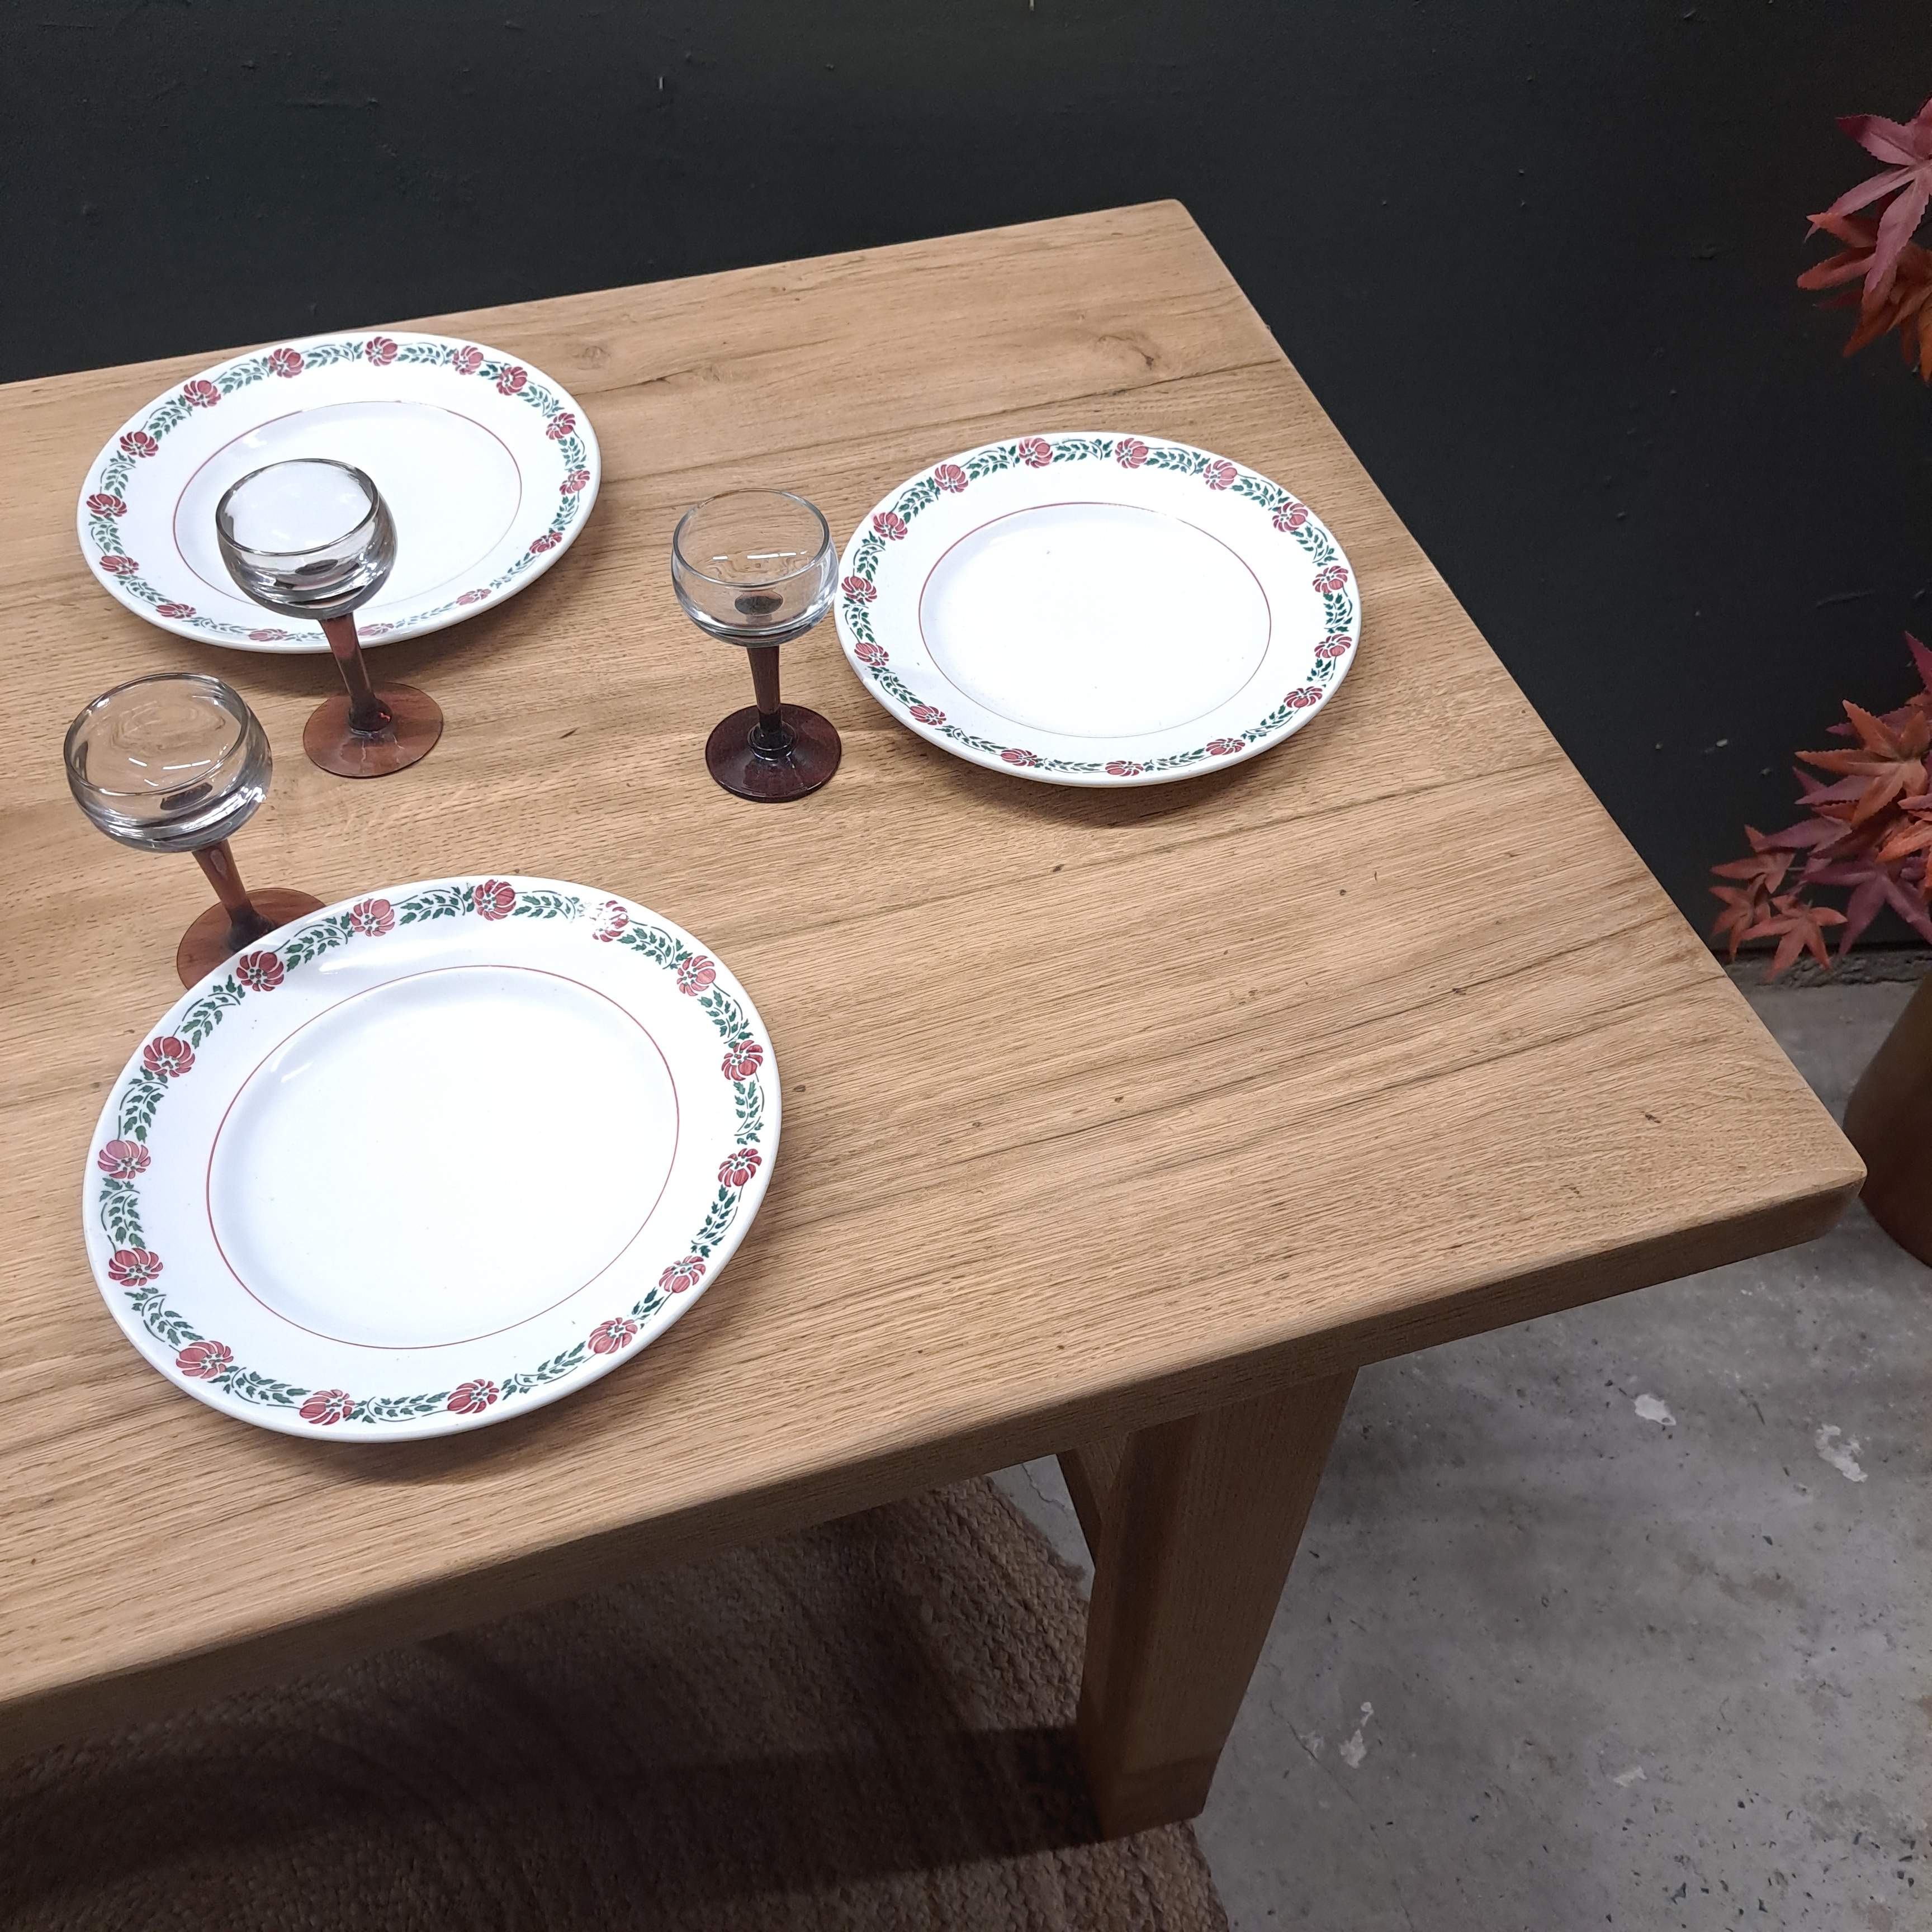 215c81ea4369.jpg Table campagne chic